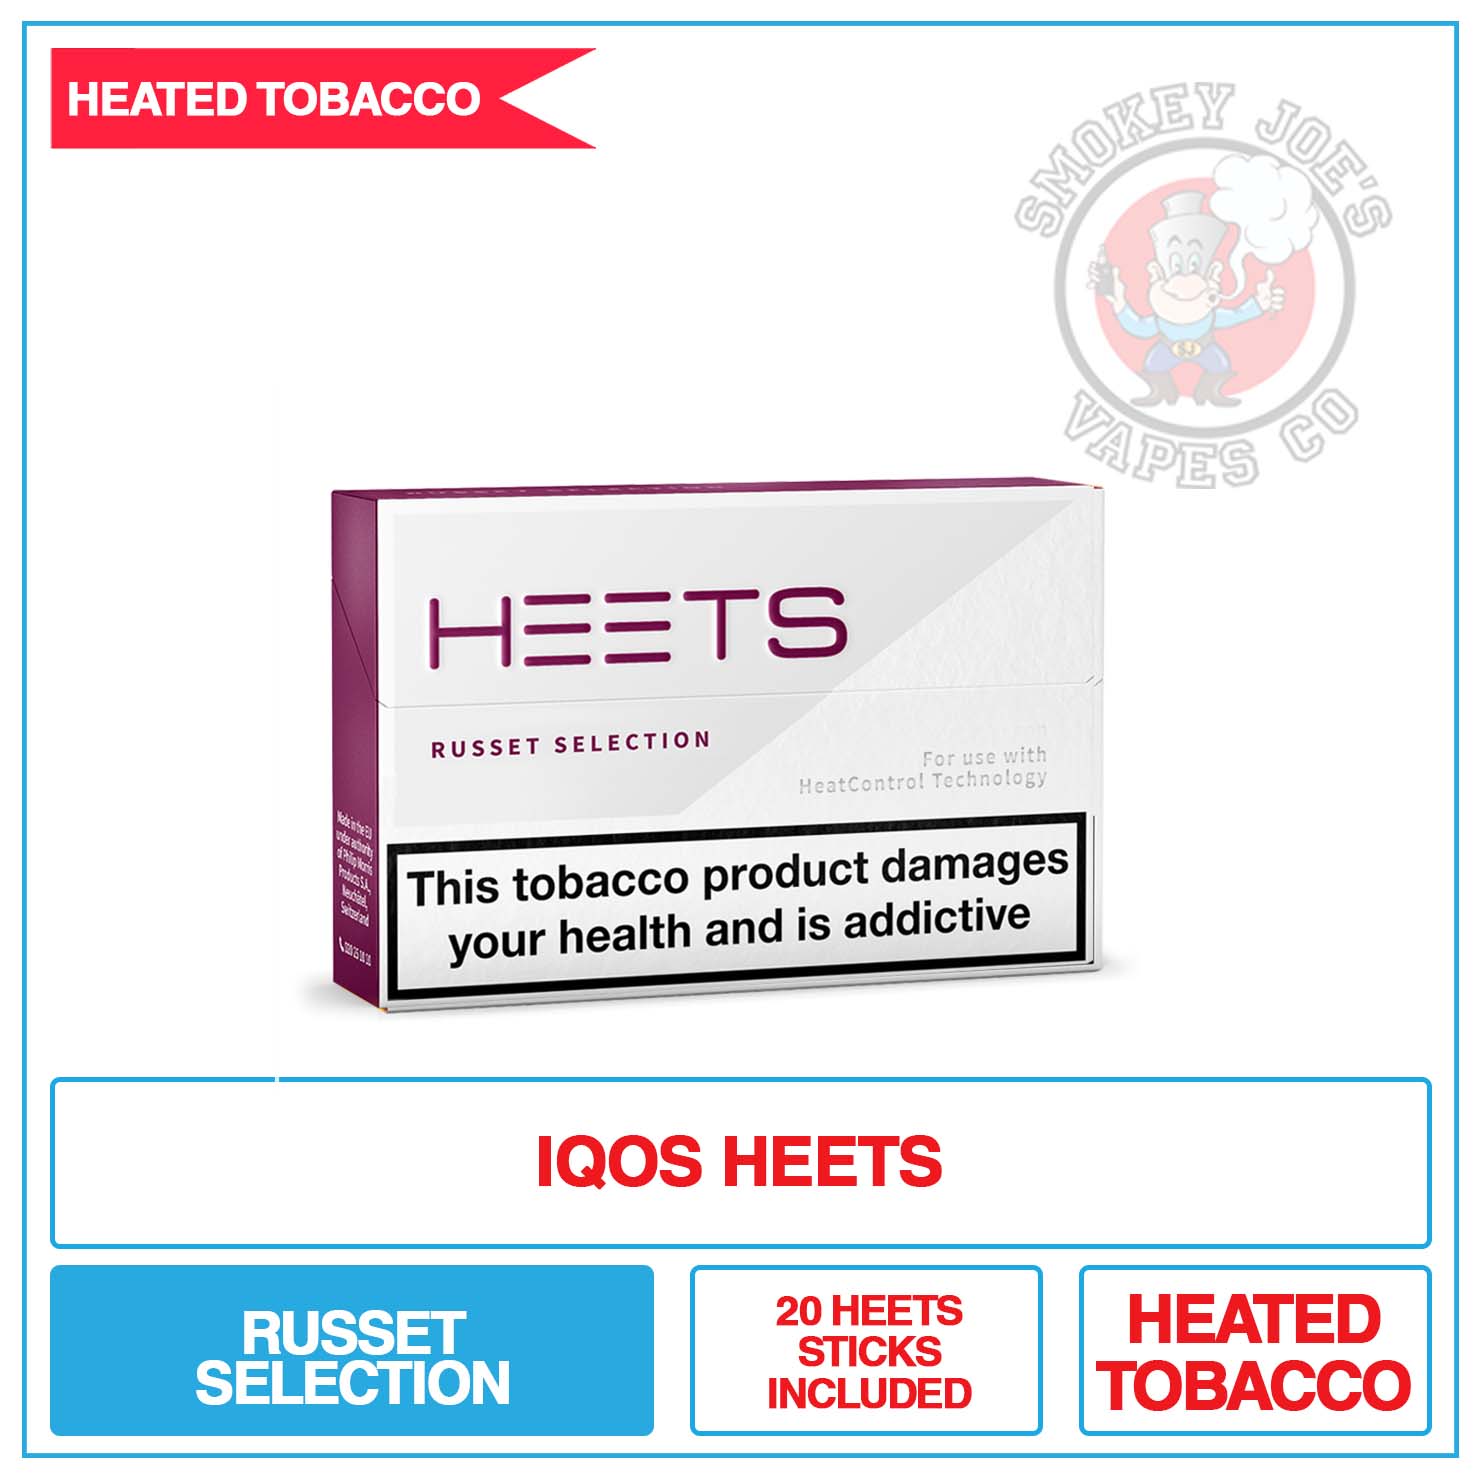 Heets - Russets Collection